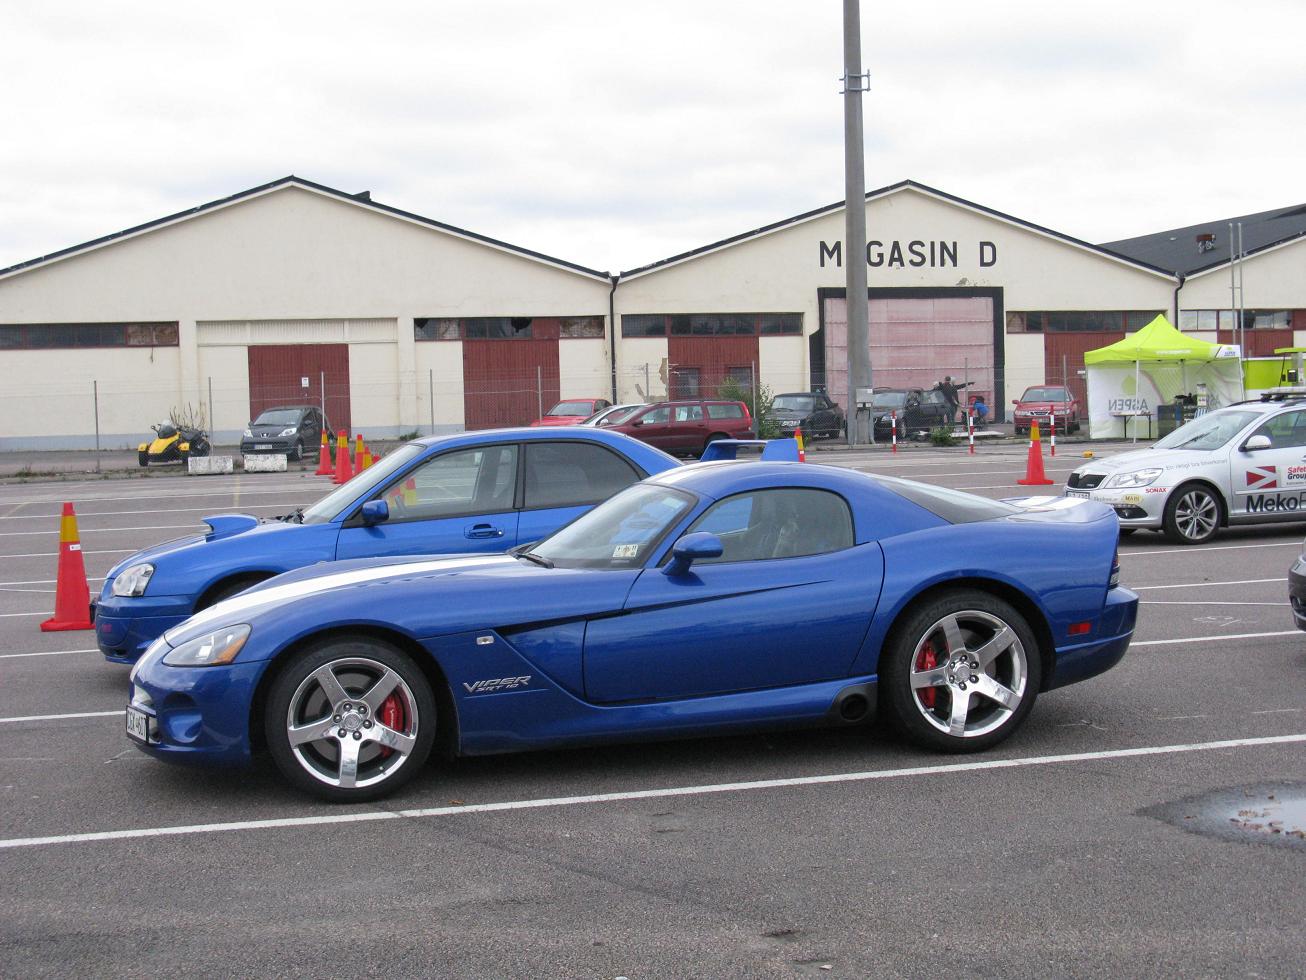 a couple of blue sports cars parked in a lot